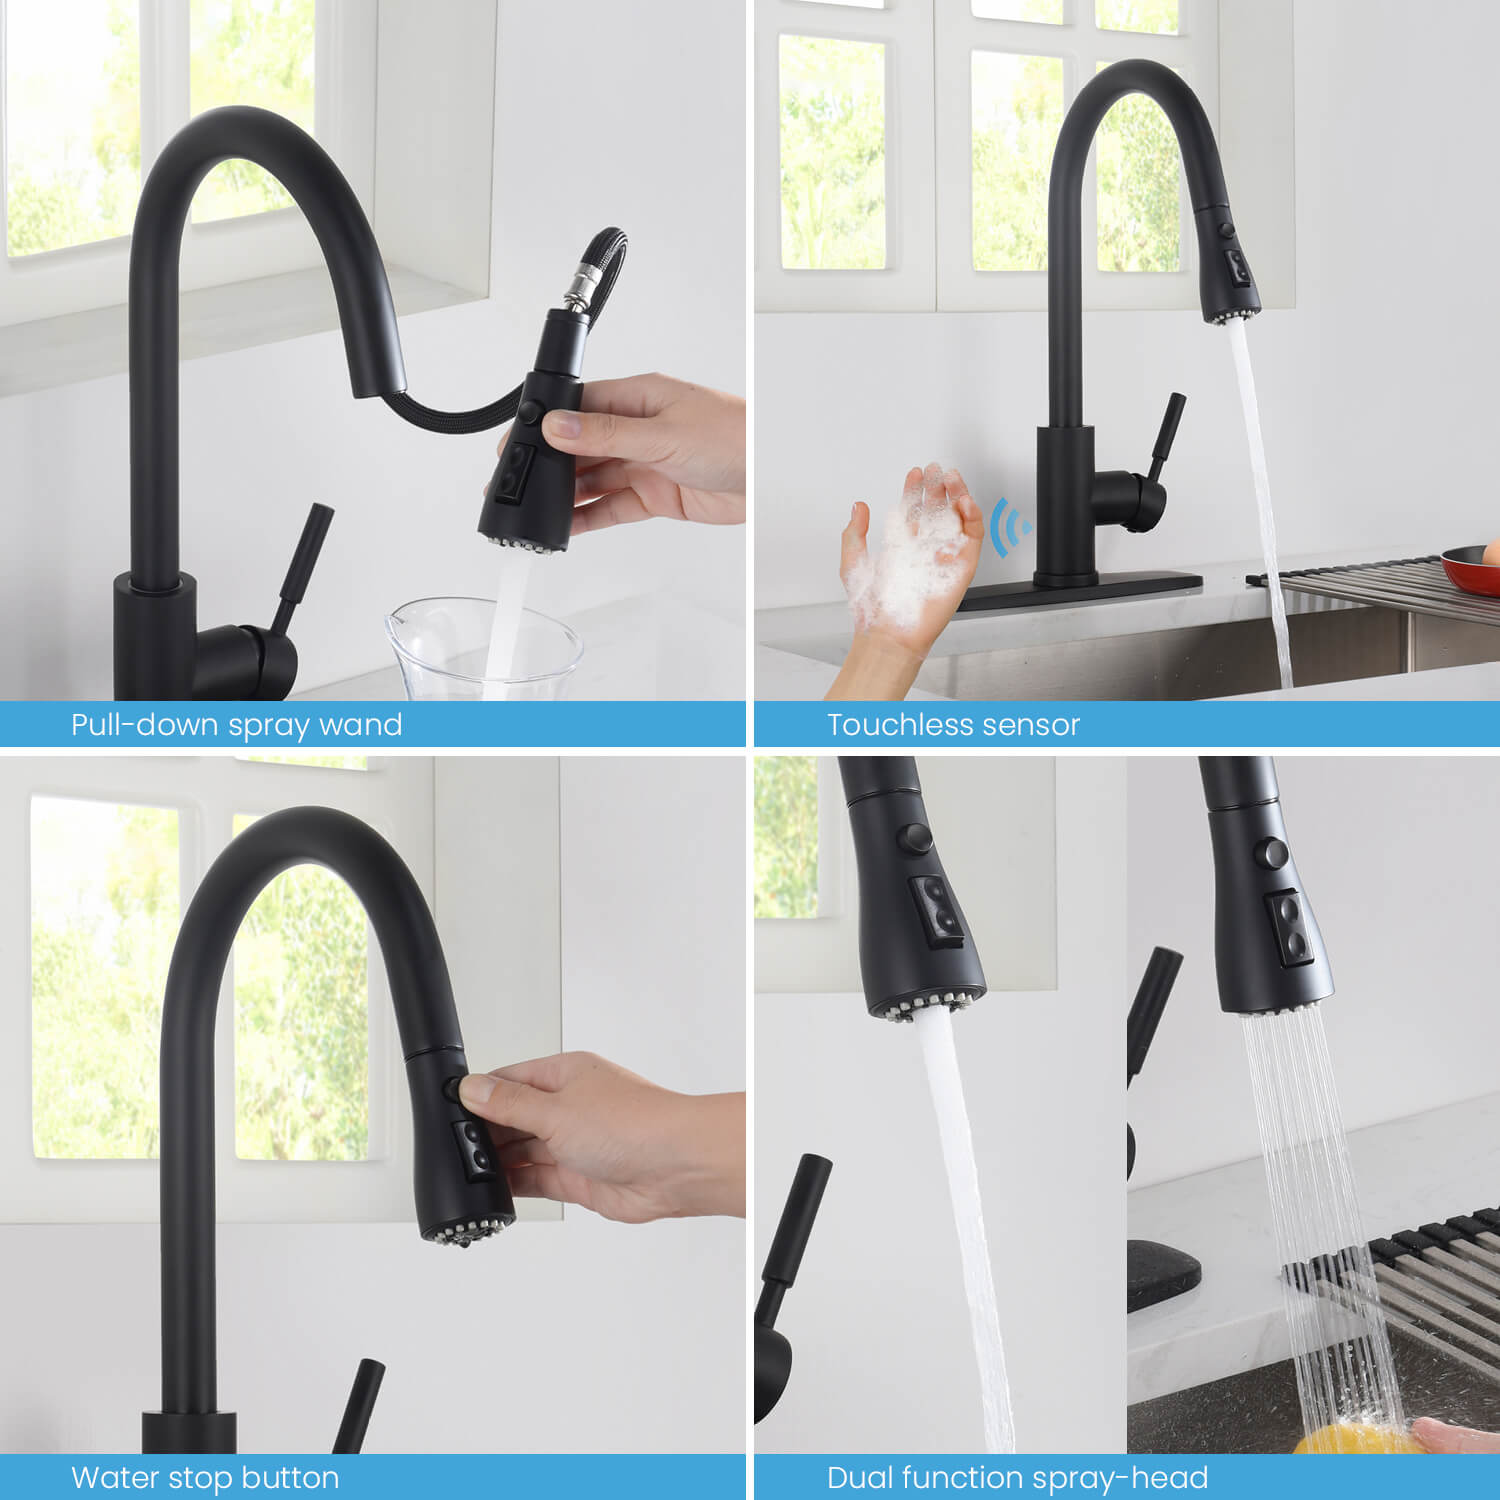 Kibi Single Handle Pull Down Kitchen Faucet With Touch Sensor In Matte Black Finish